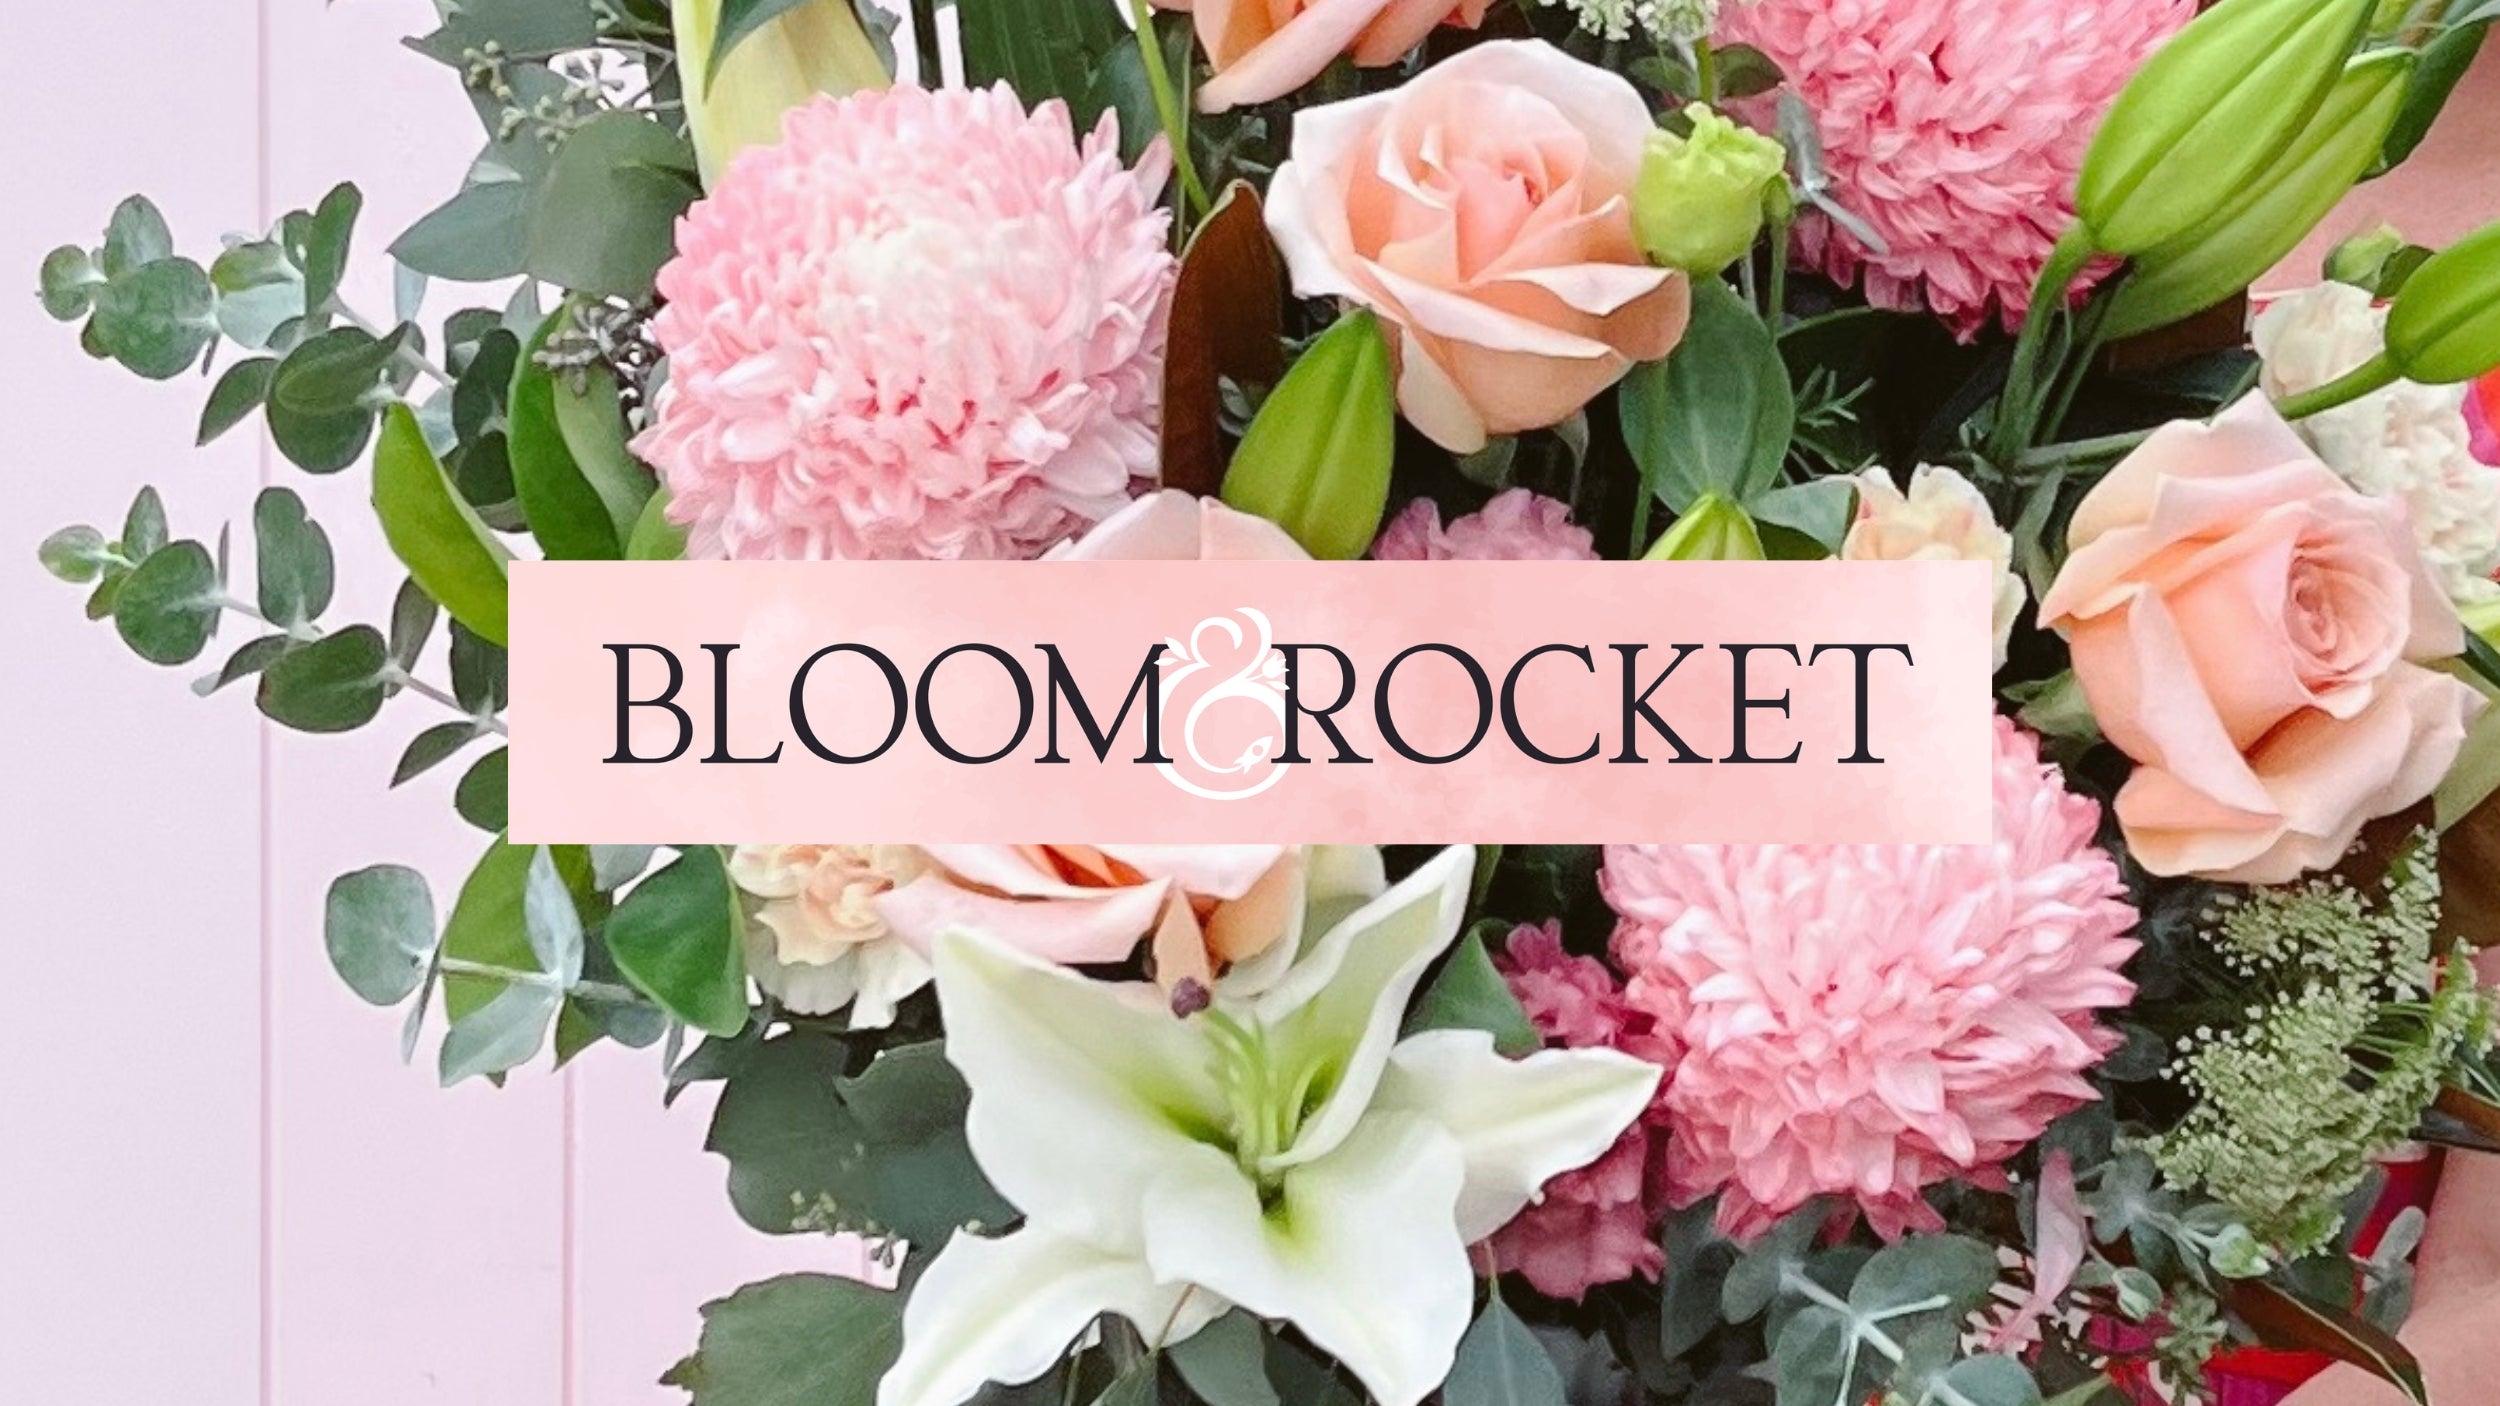 Mother's Day Flowers and Gift Ideas for Mum, available from Bloom & Rocket Florist, Indooroopilly, local delivery available in Taringa, Pullendale and Brisbane Suburbs